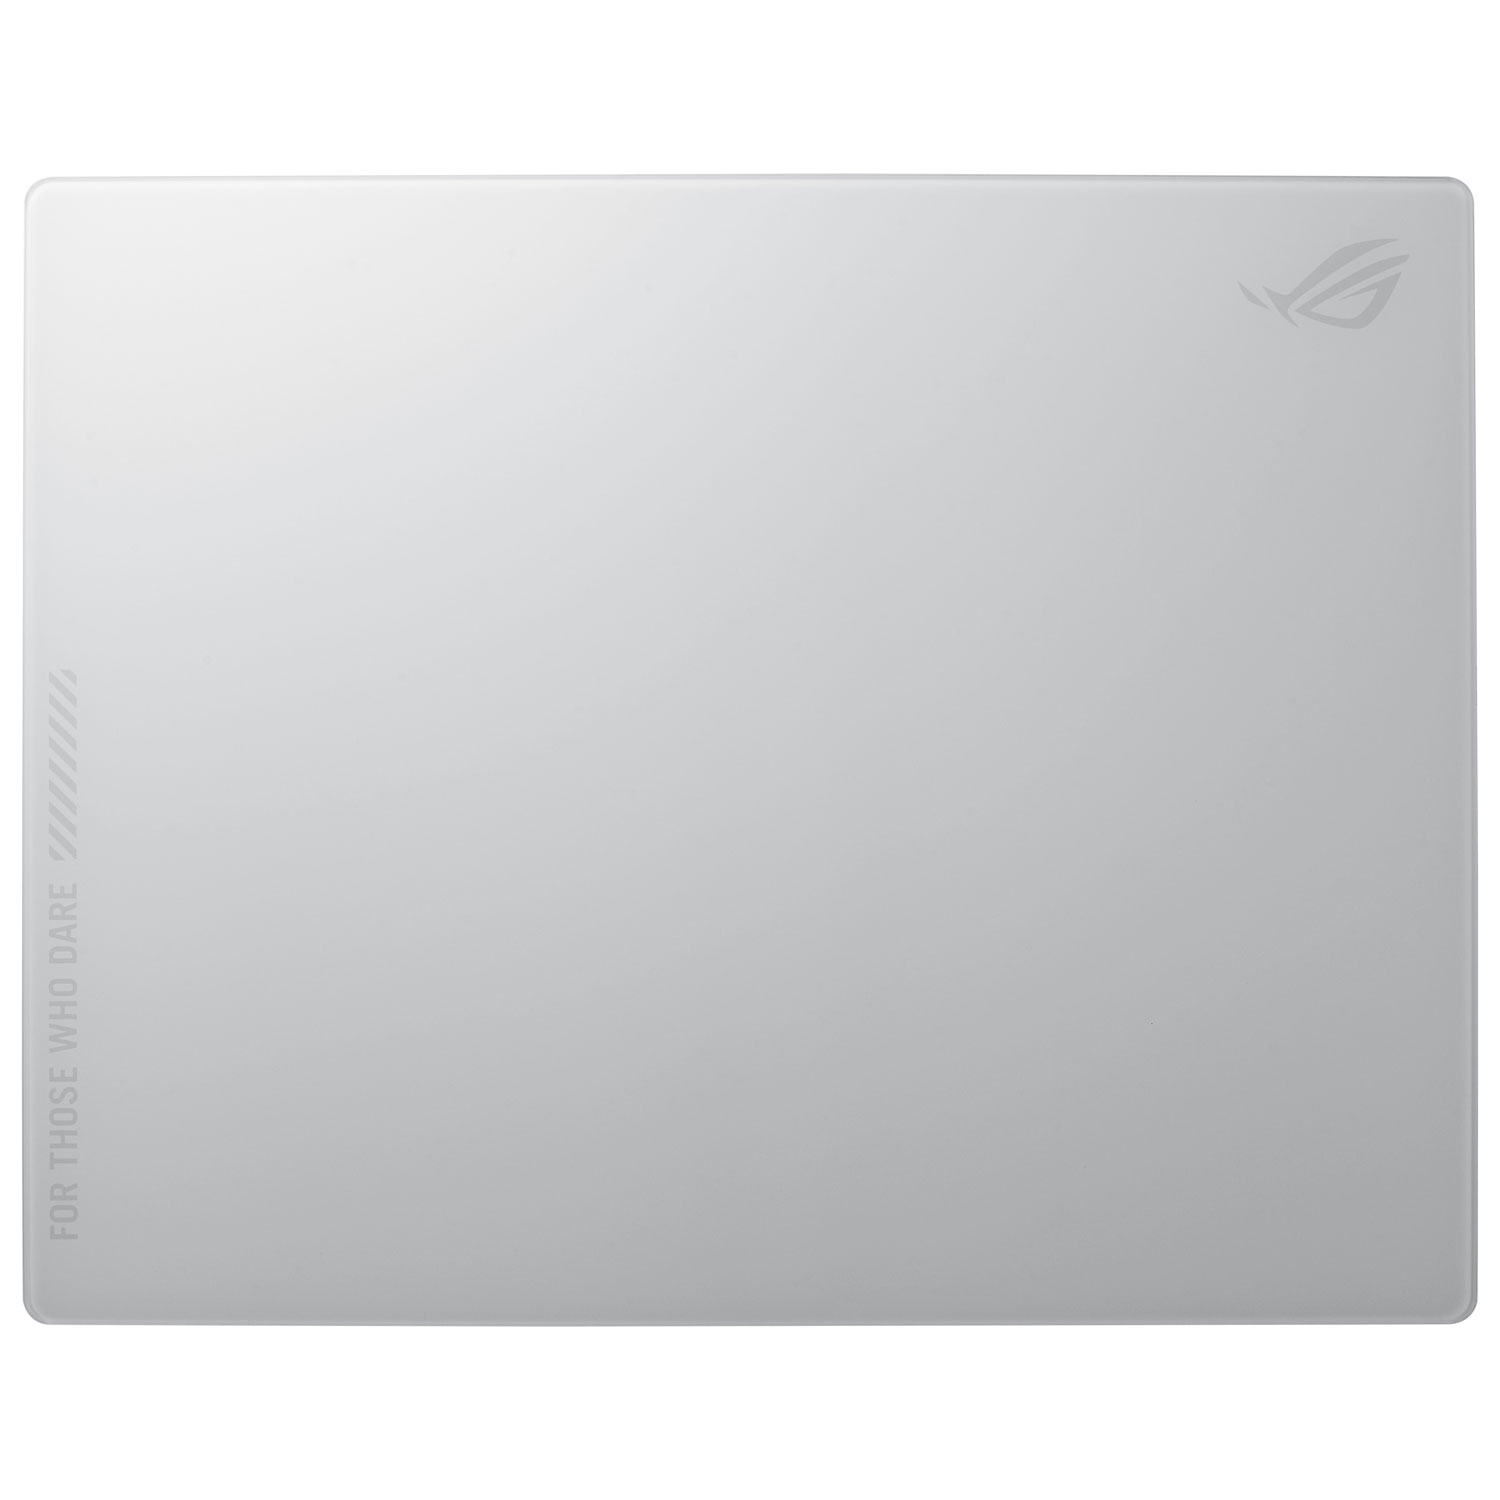 ASUS ROG Moonstone Ace Gaming Mouse Pad - White - Only at Best Buy